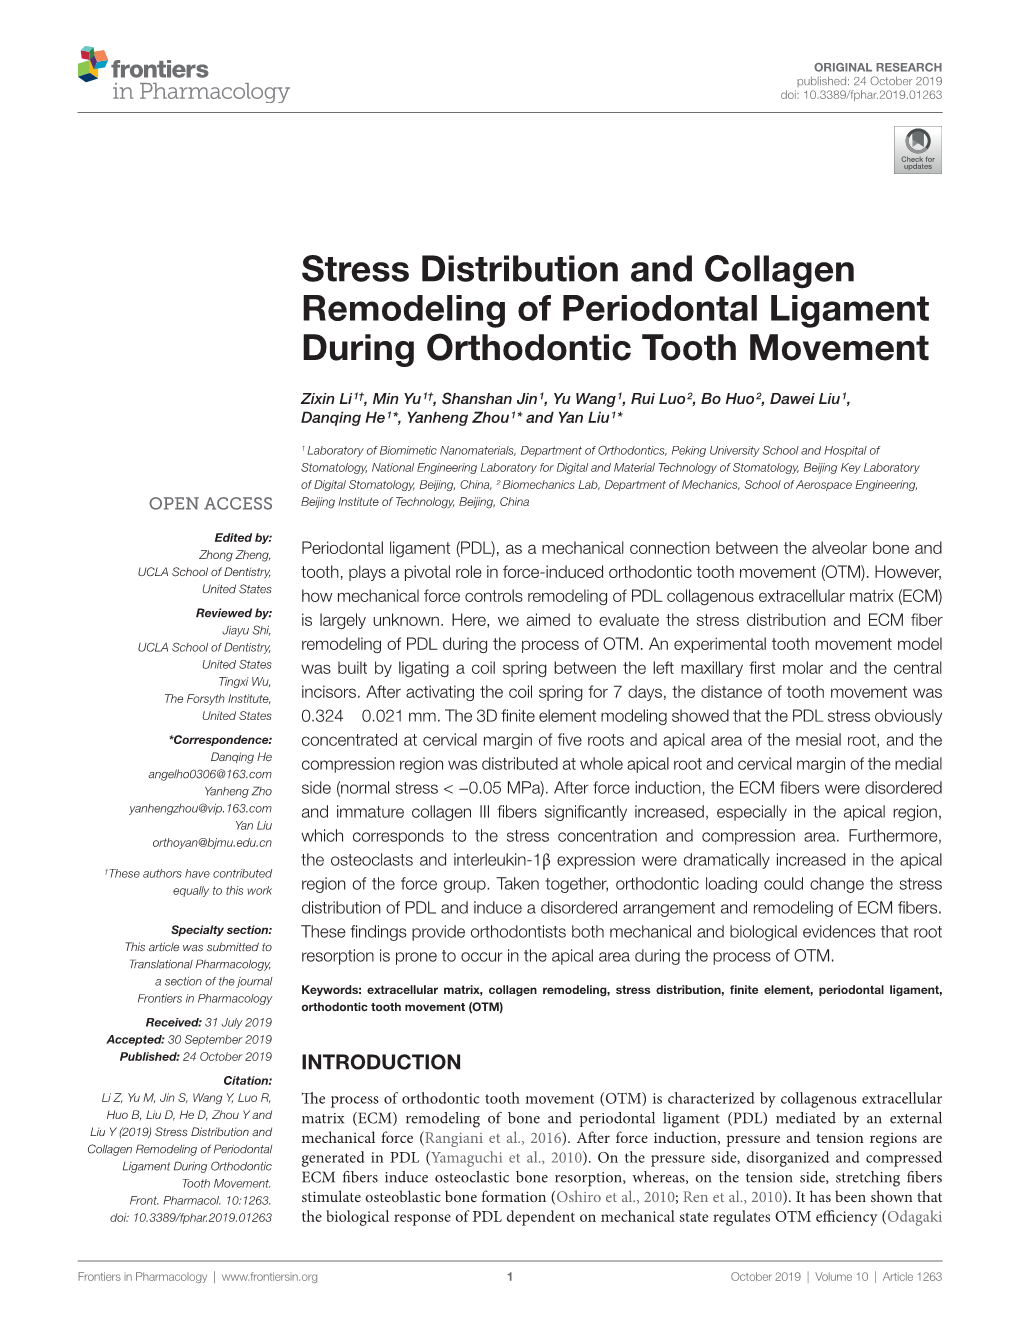 Stress Distribution and Collagen Remodeling of Periodontal Ligament During Orthodontic Tooth Movement